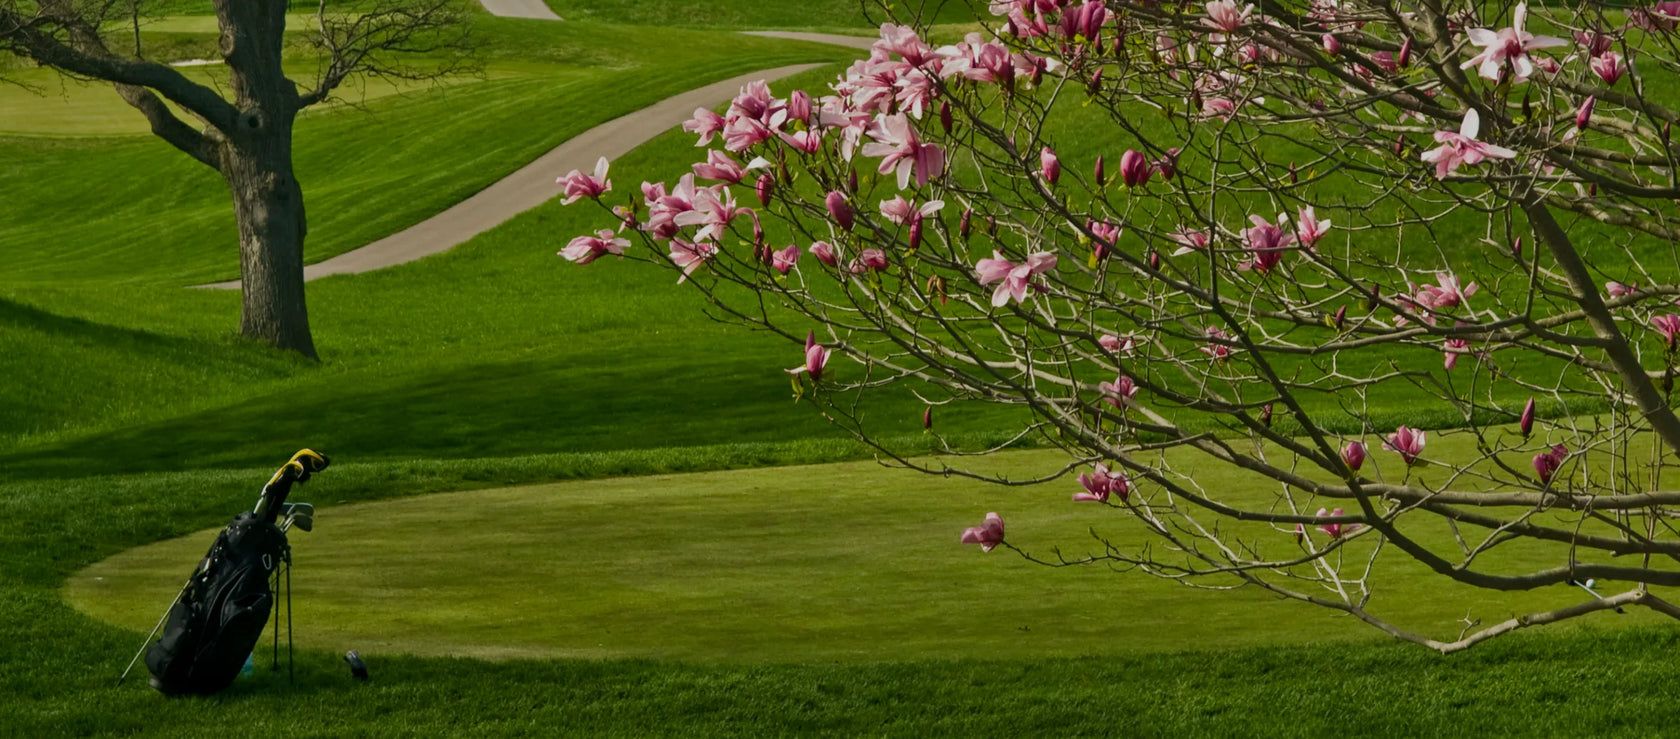 A blossom of magnolia tree on the golf course | MIA Golf Technology